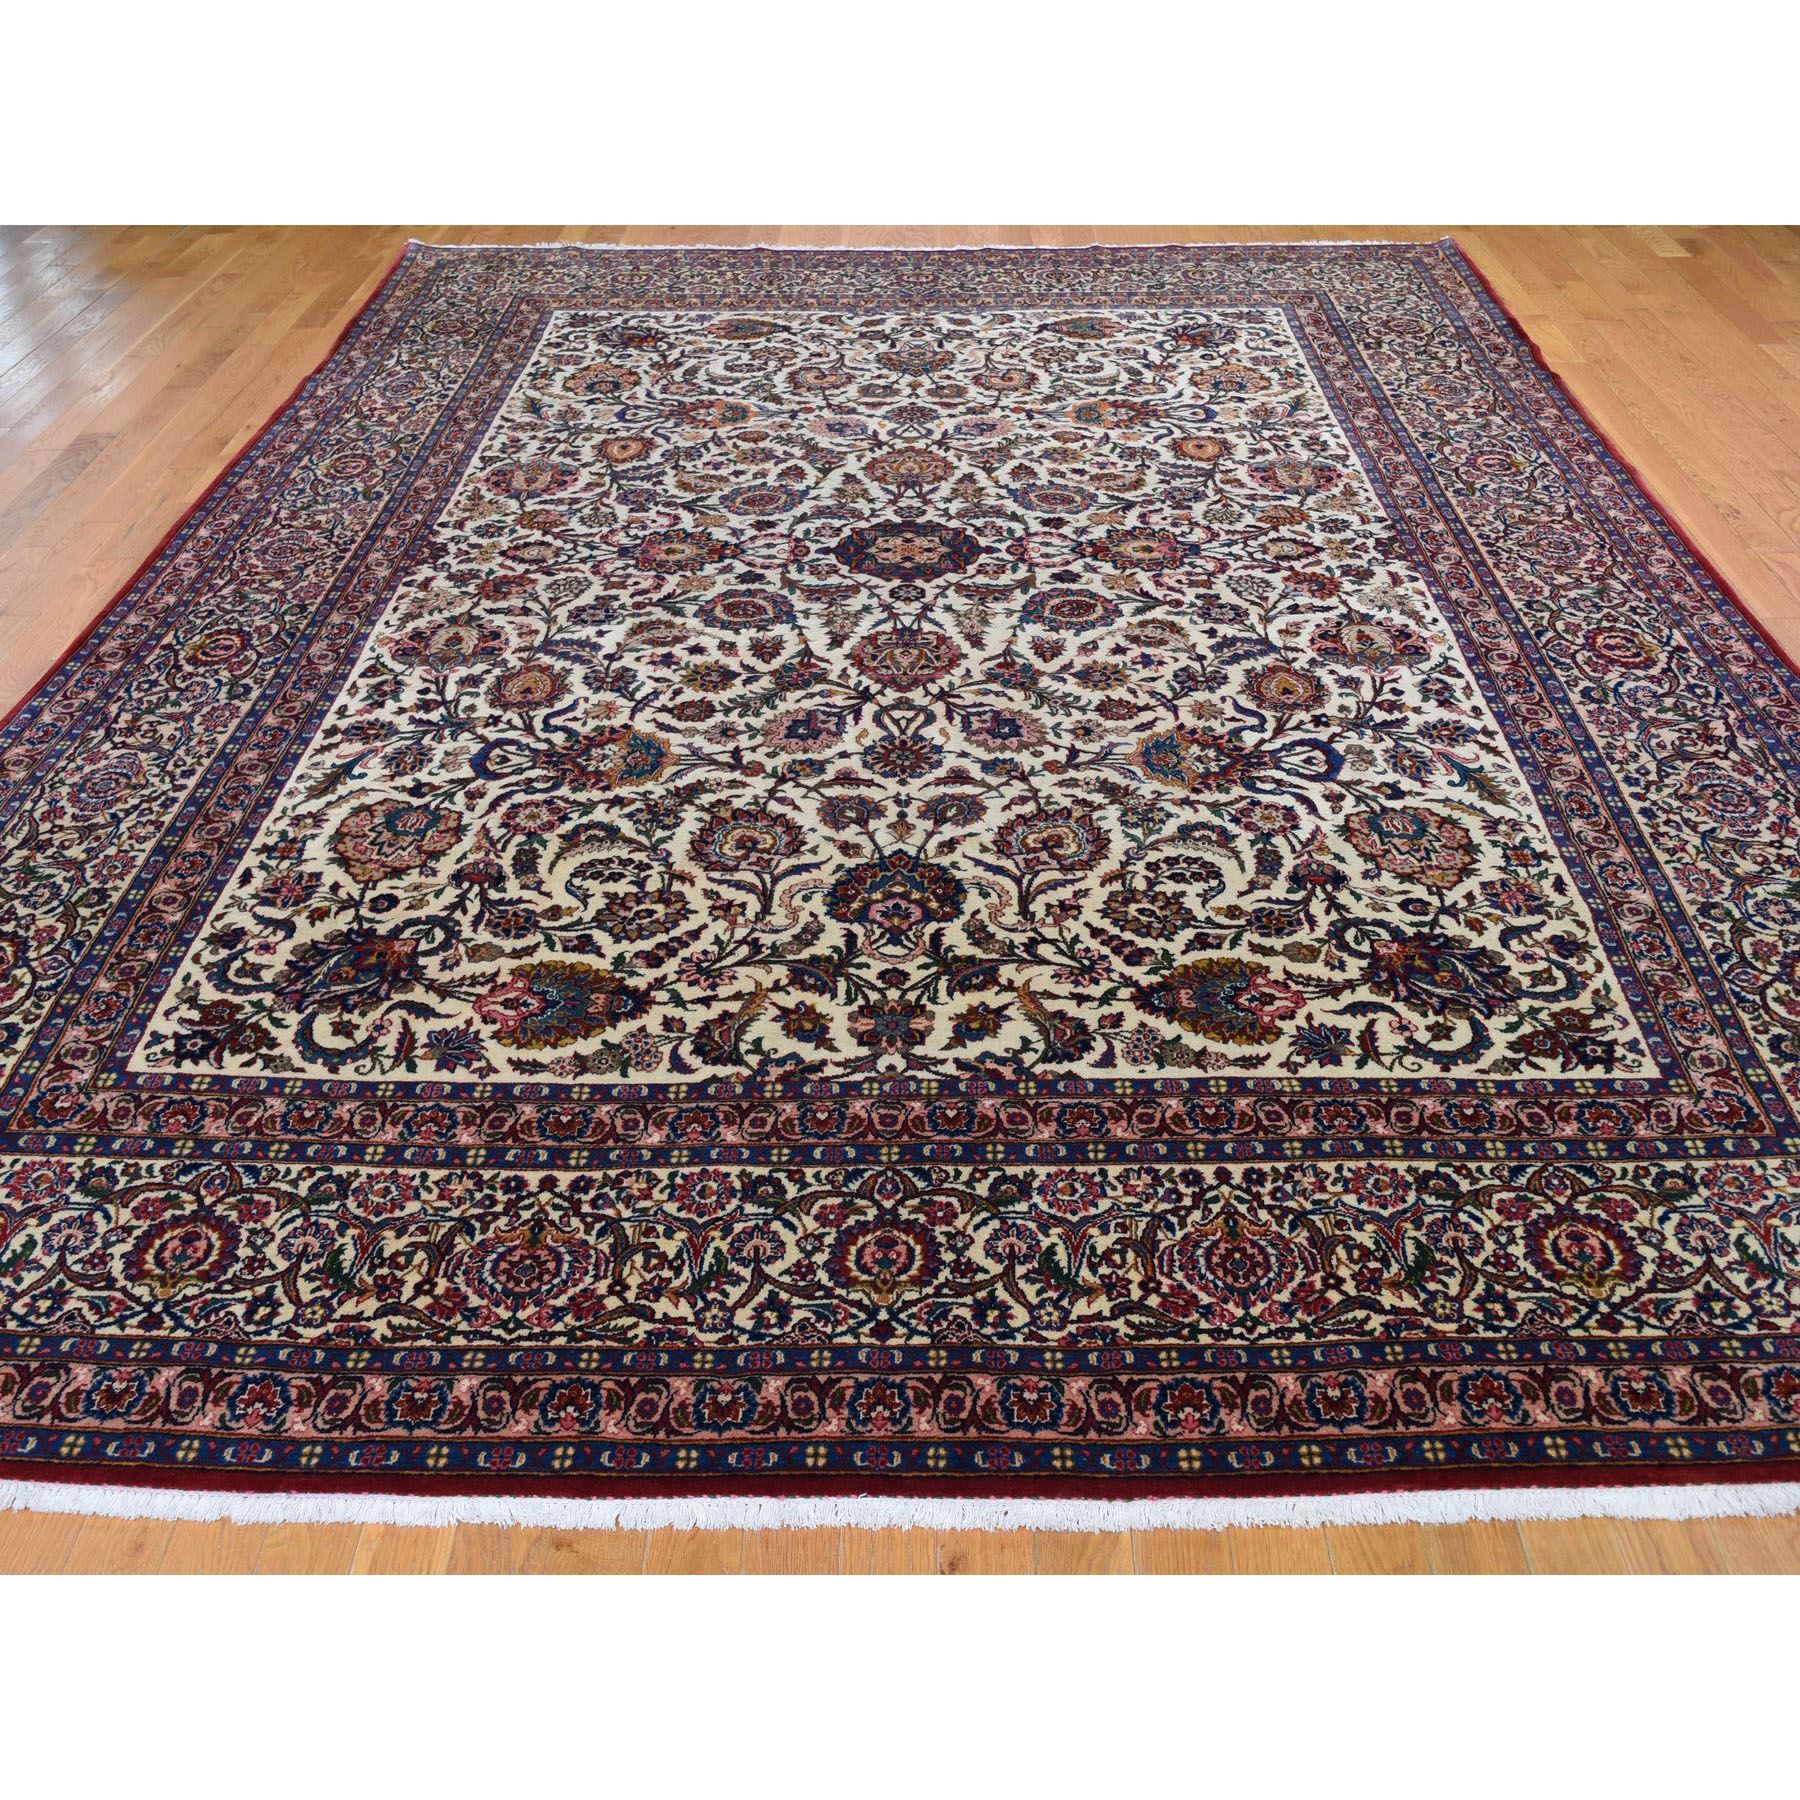 8-10 x12-2  Ivory Antique Persian Kashan Full Pile Exc Condition Pure Wool Hand Knotted Oriental Rug 